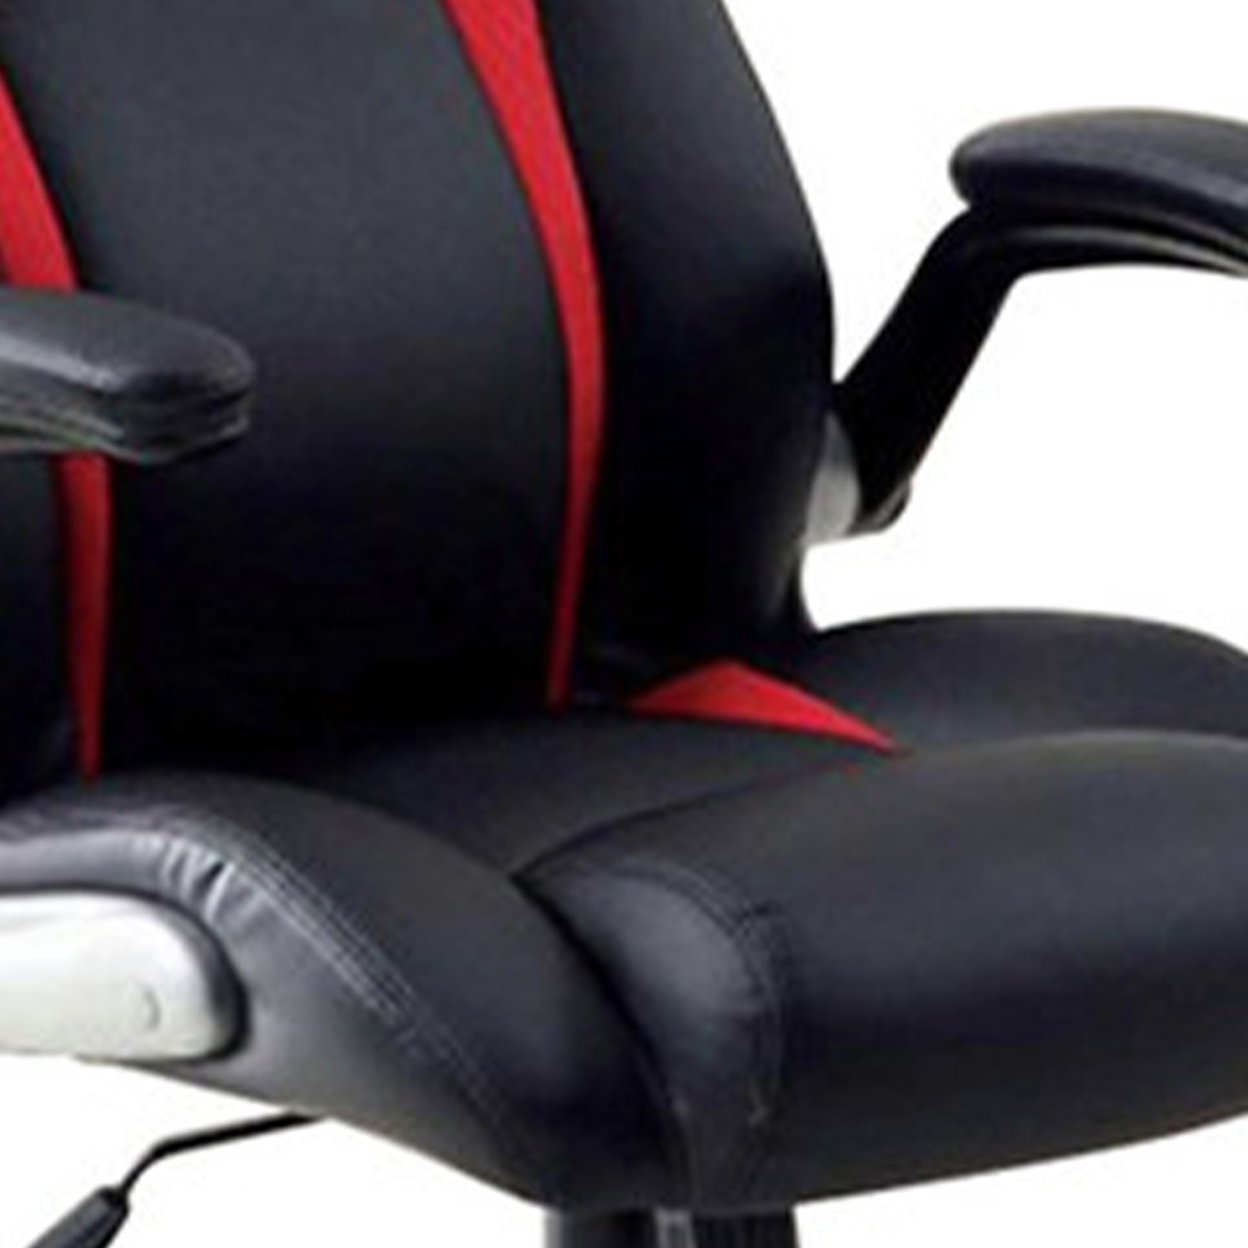 Leatherette Gaming Chair With Padded Armrests And Adjustable Height, Black- Saltoro Sherpi